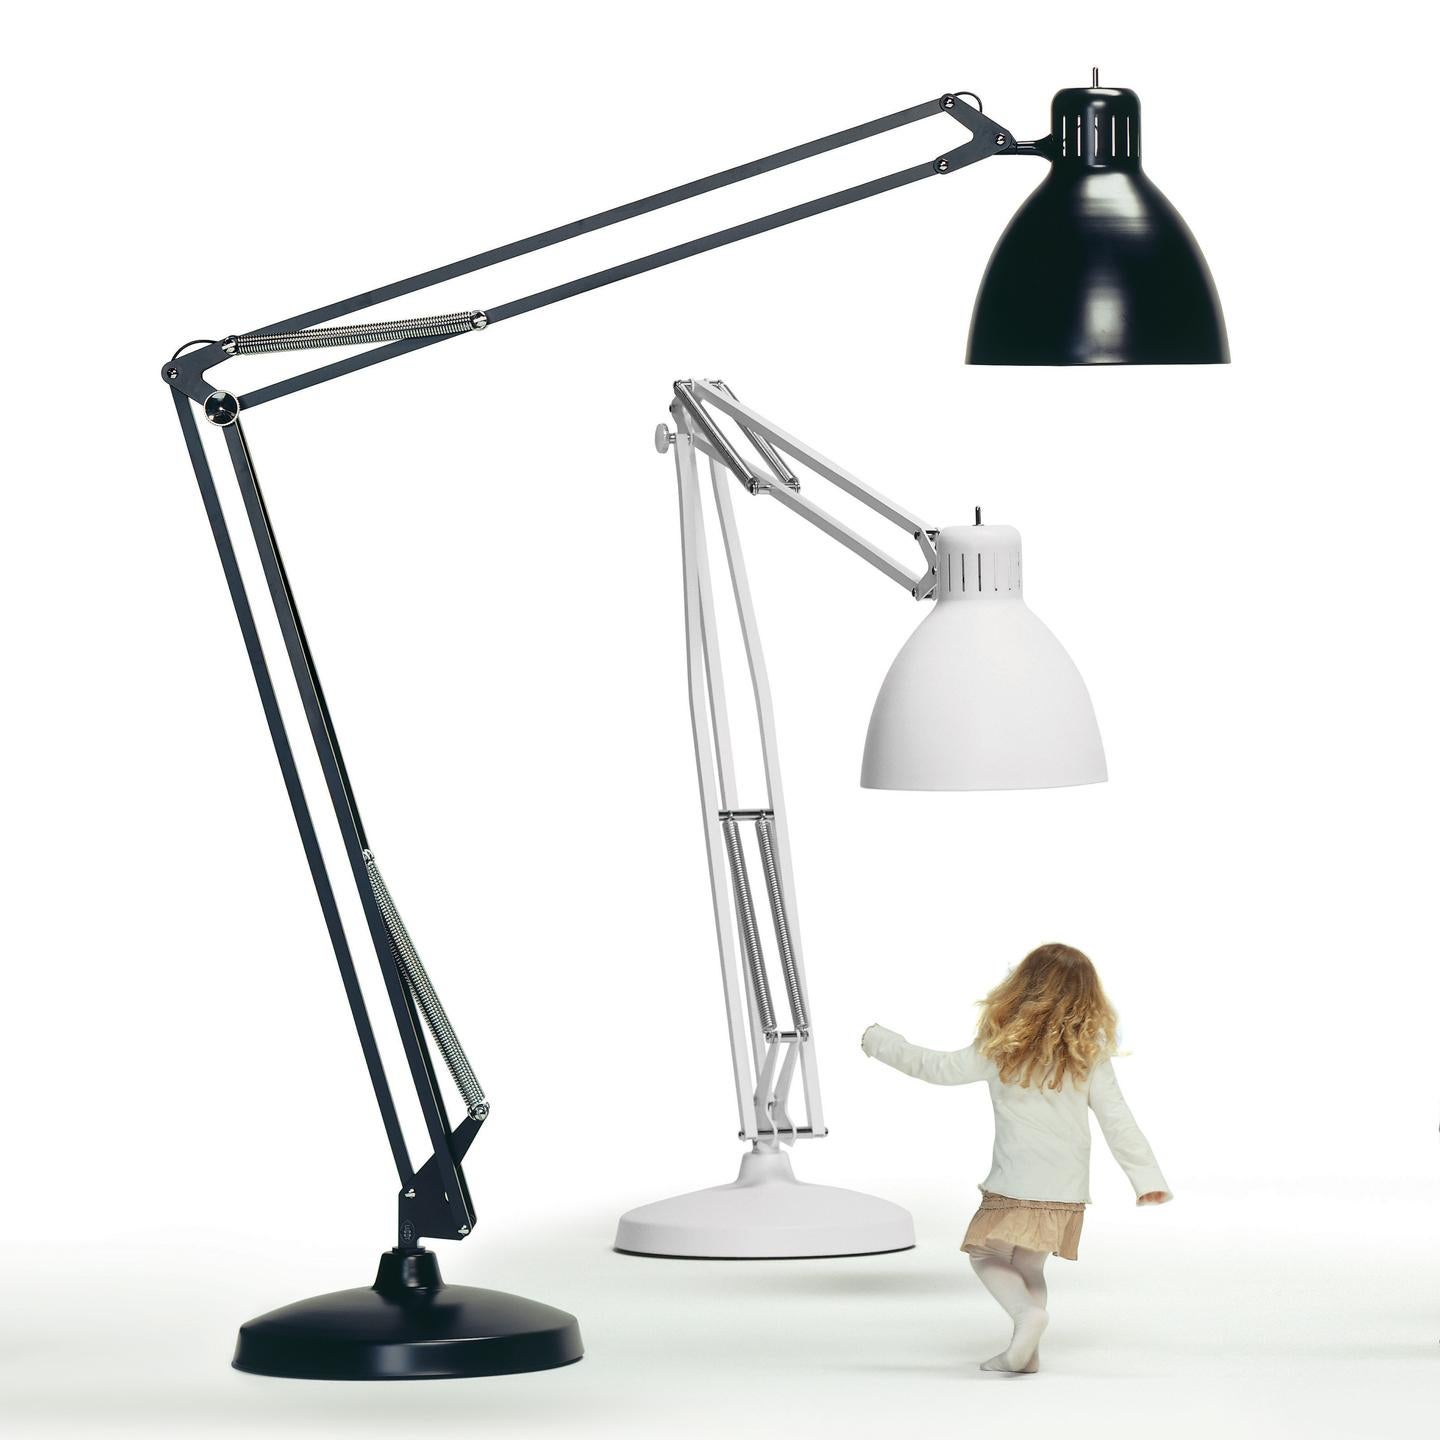 The Great JJ Floor Lamp updates the original Jac Jacobsen L-1 architect desk lamp (1937) for contemporary use. The 2009 refresh of this iconic design is a clever play on scale that turns a simple classic task lamp into a bold statement piece for